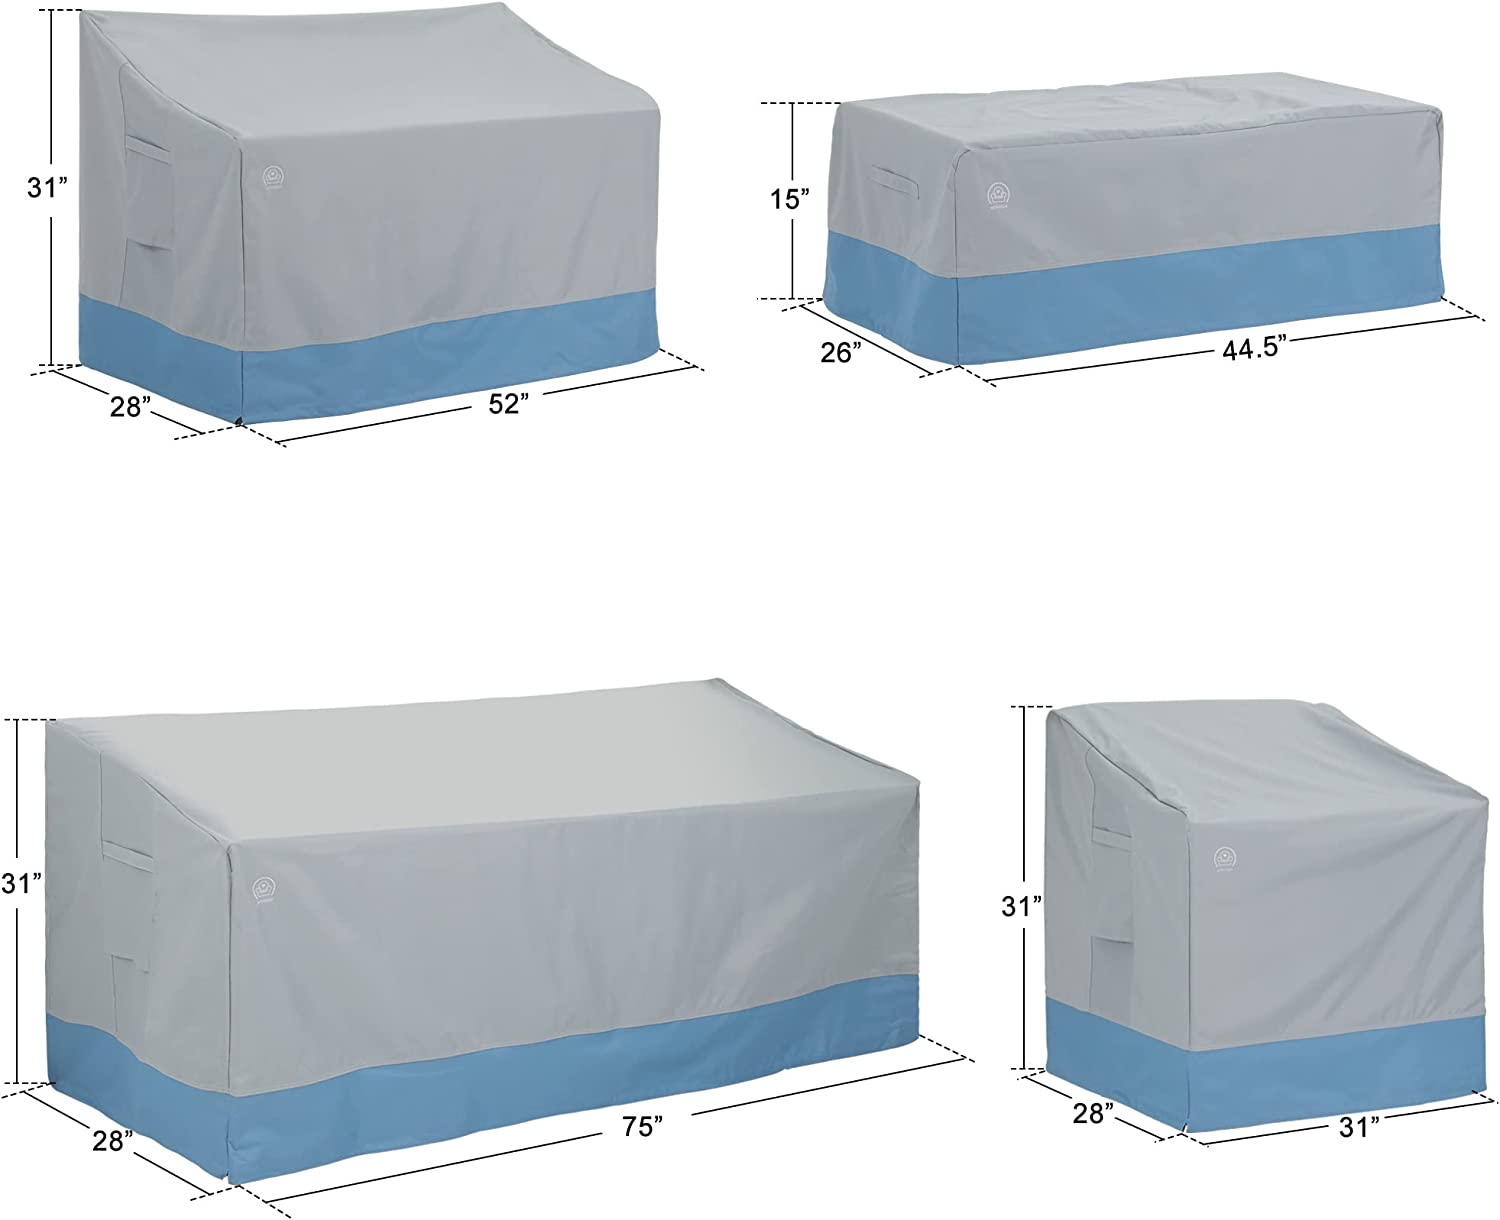 Outdoor Patio Furniture Set Cover